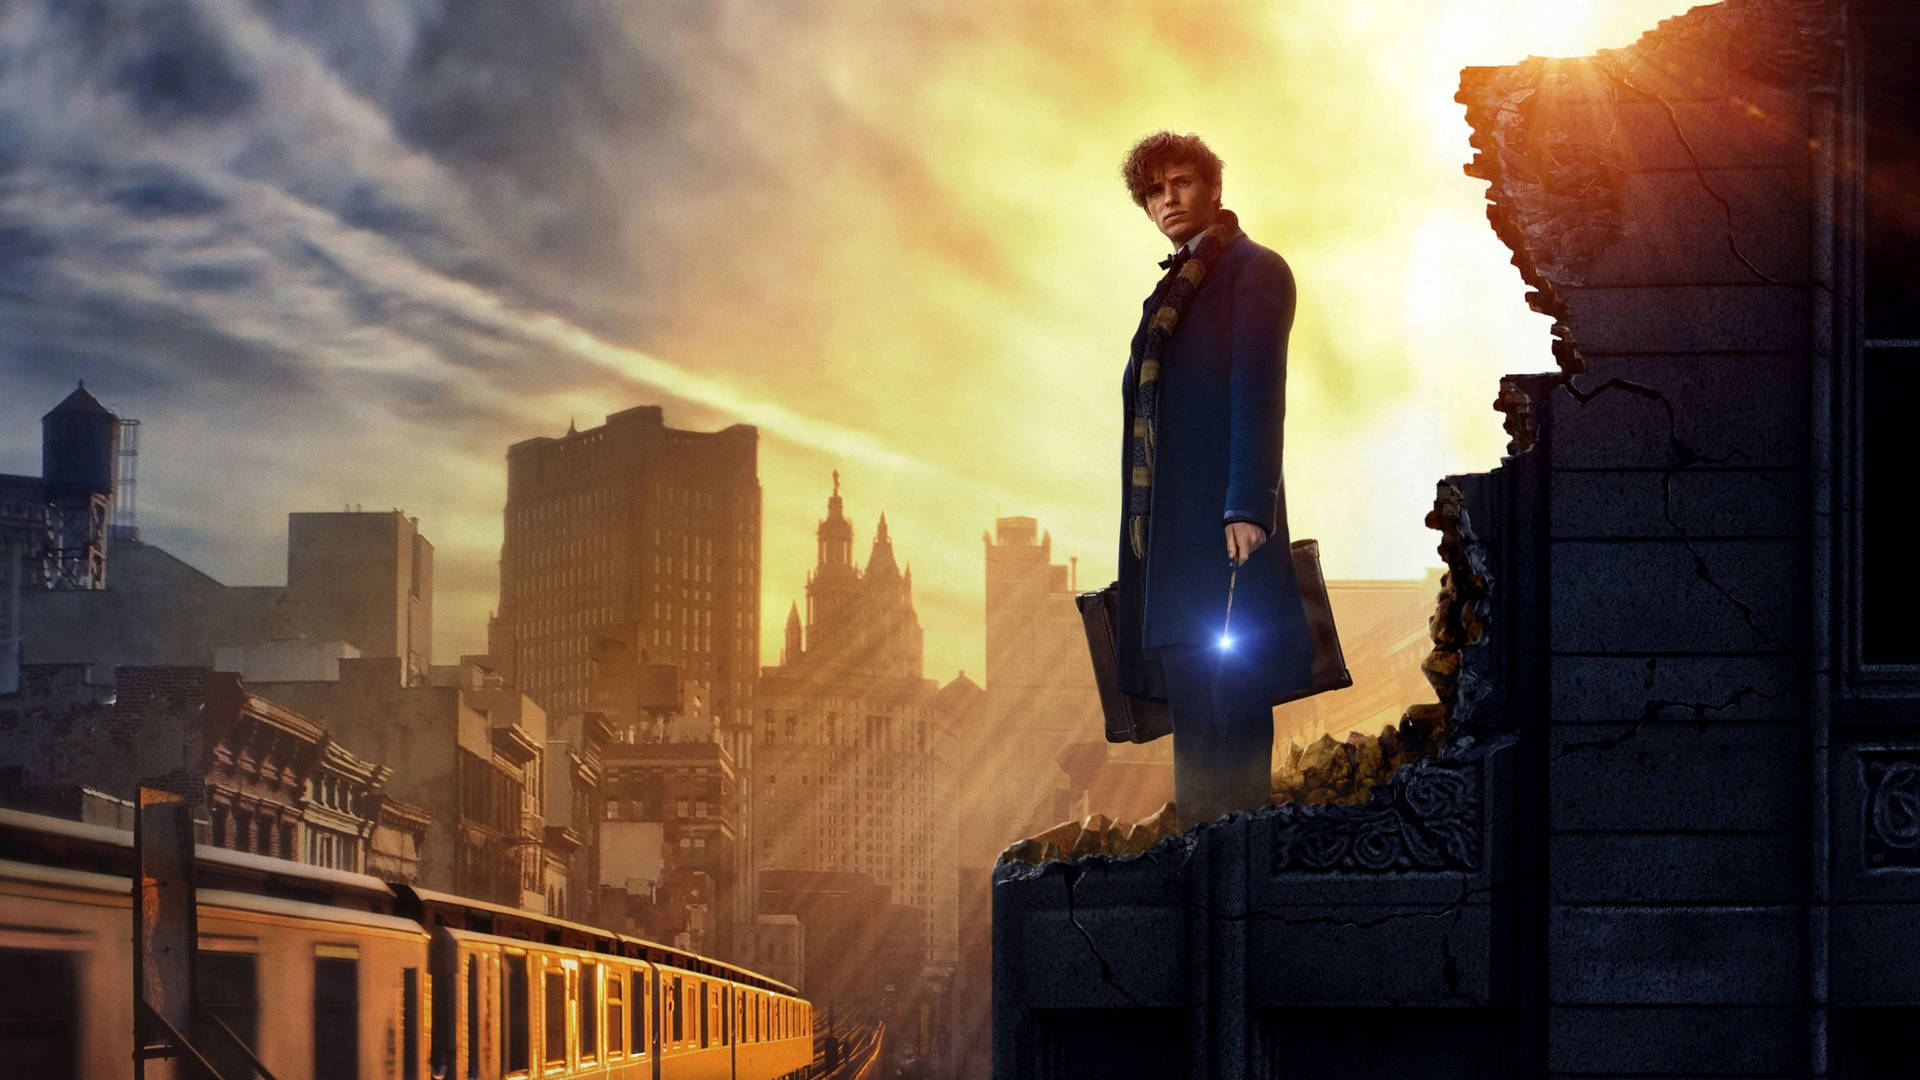 Fantastic Beasts And Where To Find Them Newt Scamander Standing On Top Of A Building Wallpaper